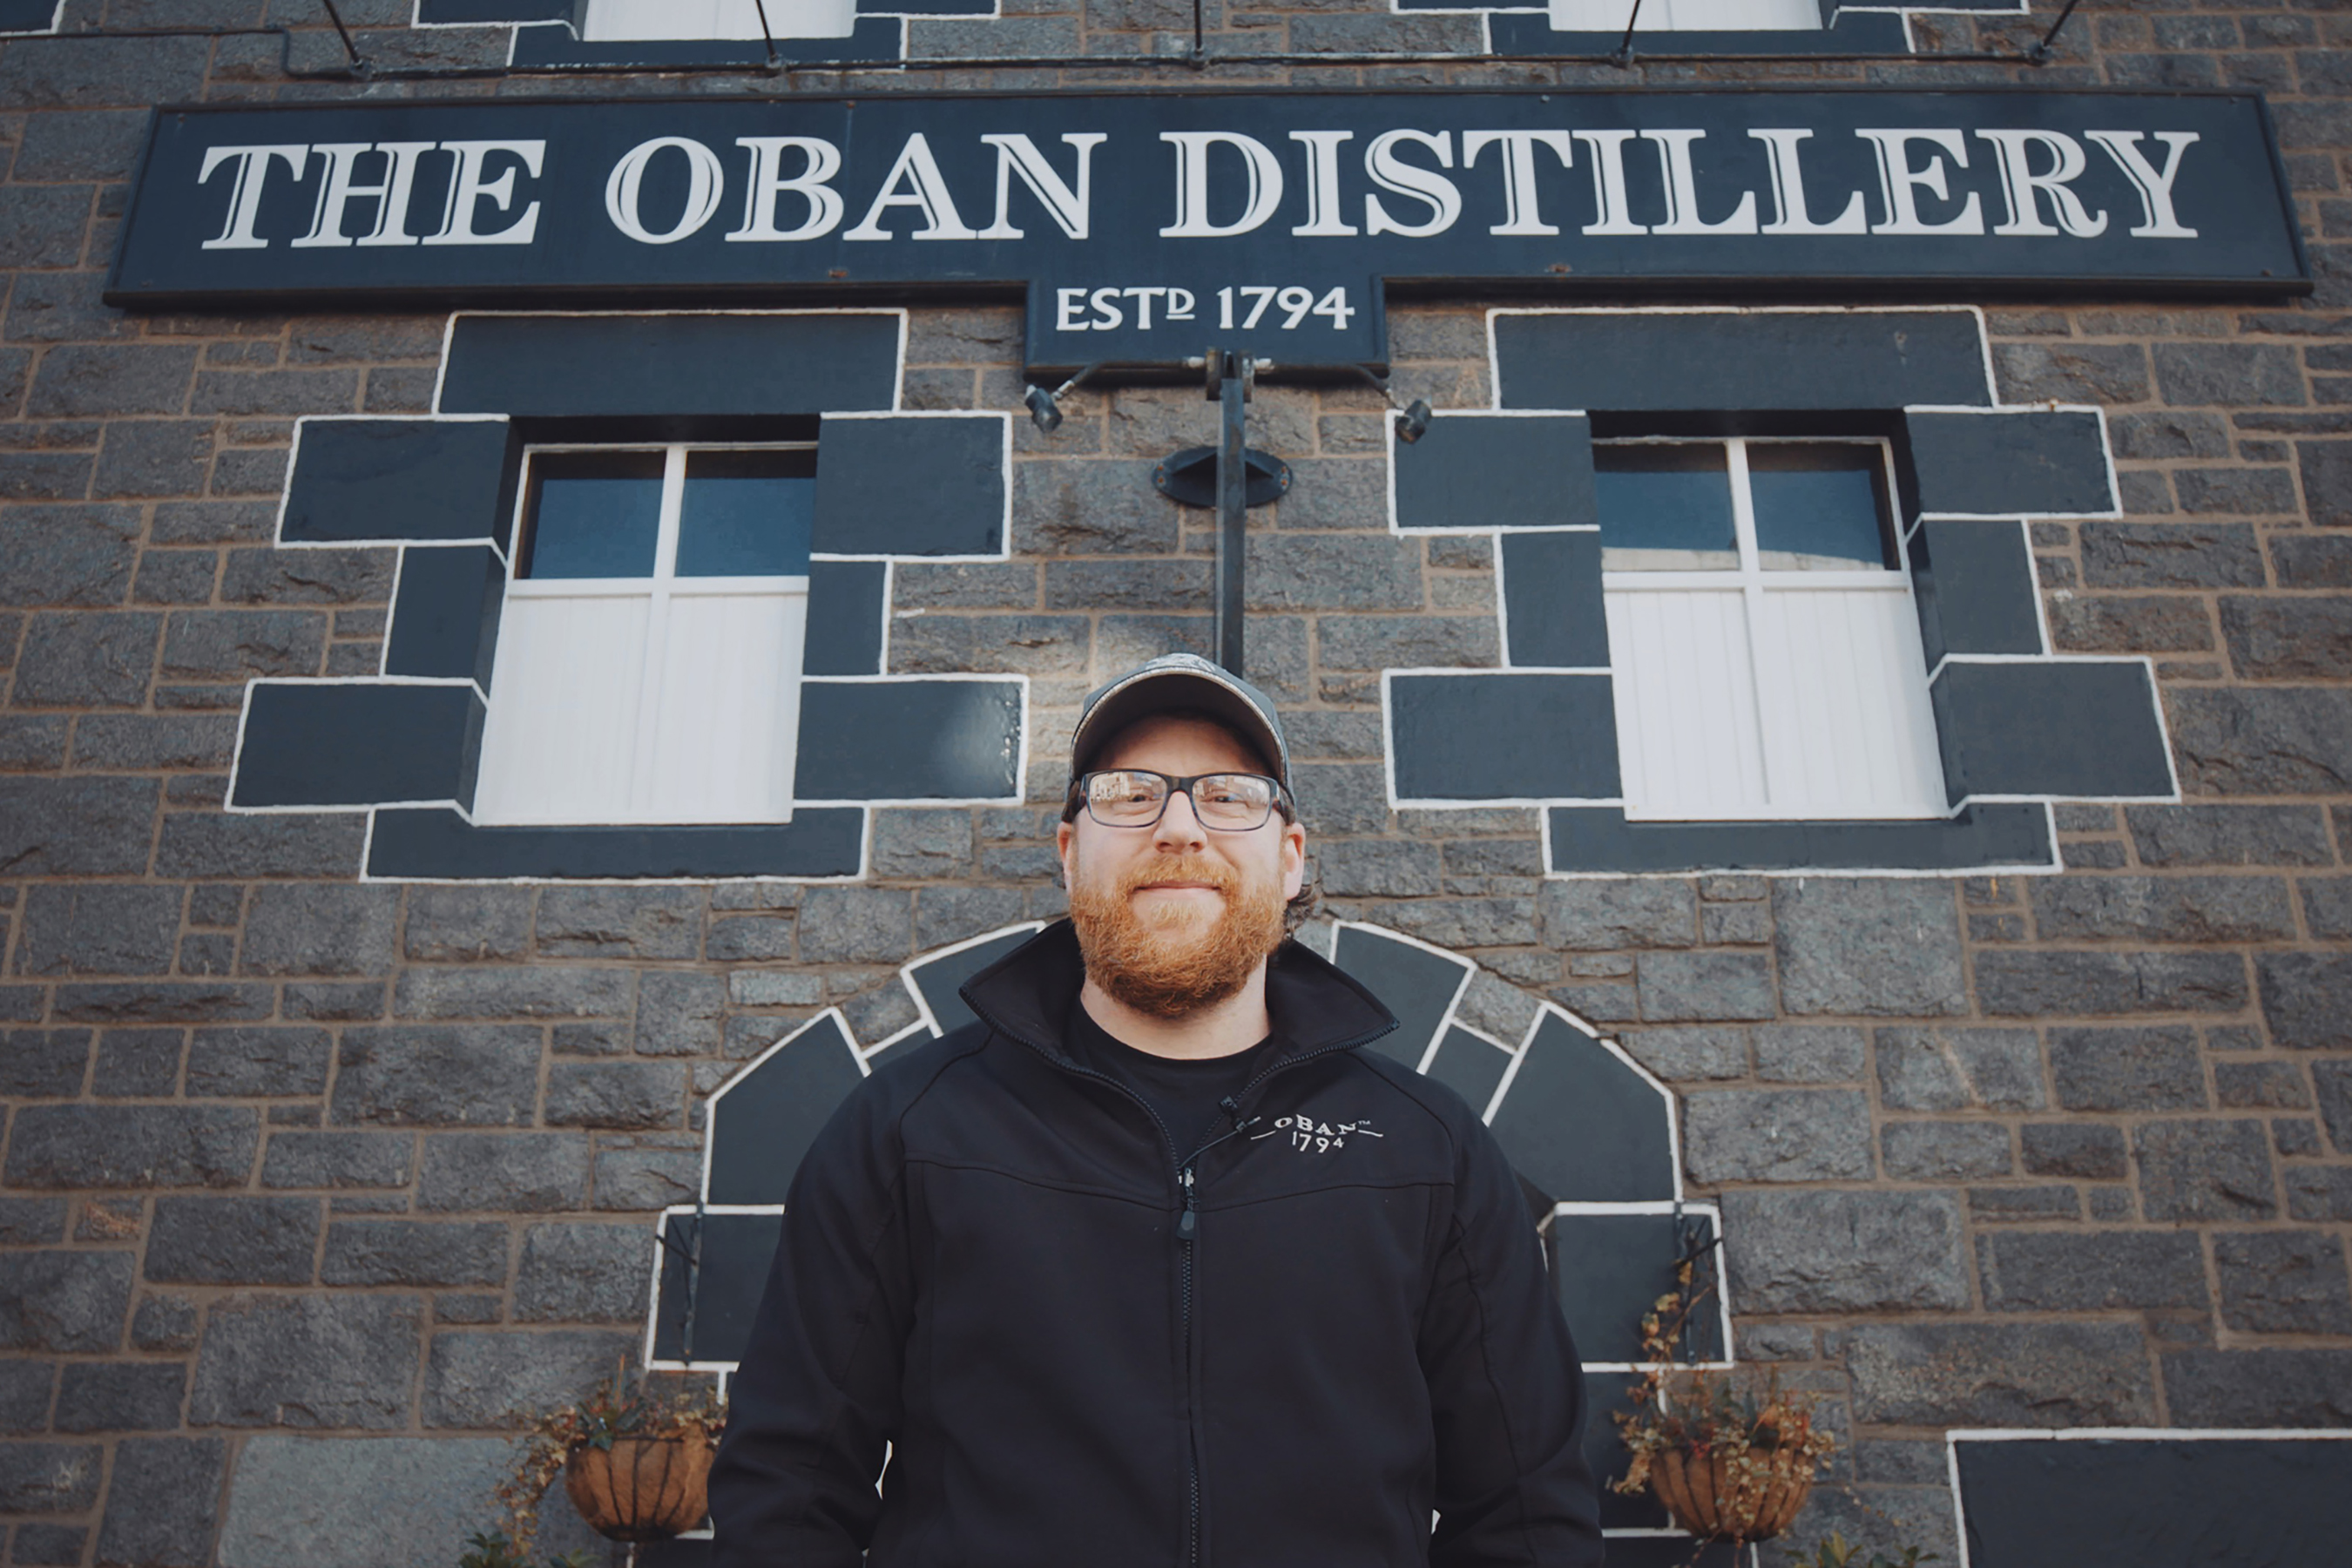 Derek Maclean is a third-generation Oban Distillery worker and has been making this craft Single Malt Scotch Whisky since 2017. His father worked at the Oban distillery for 32 years, and his grandfather for 37 years.